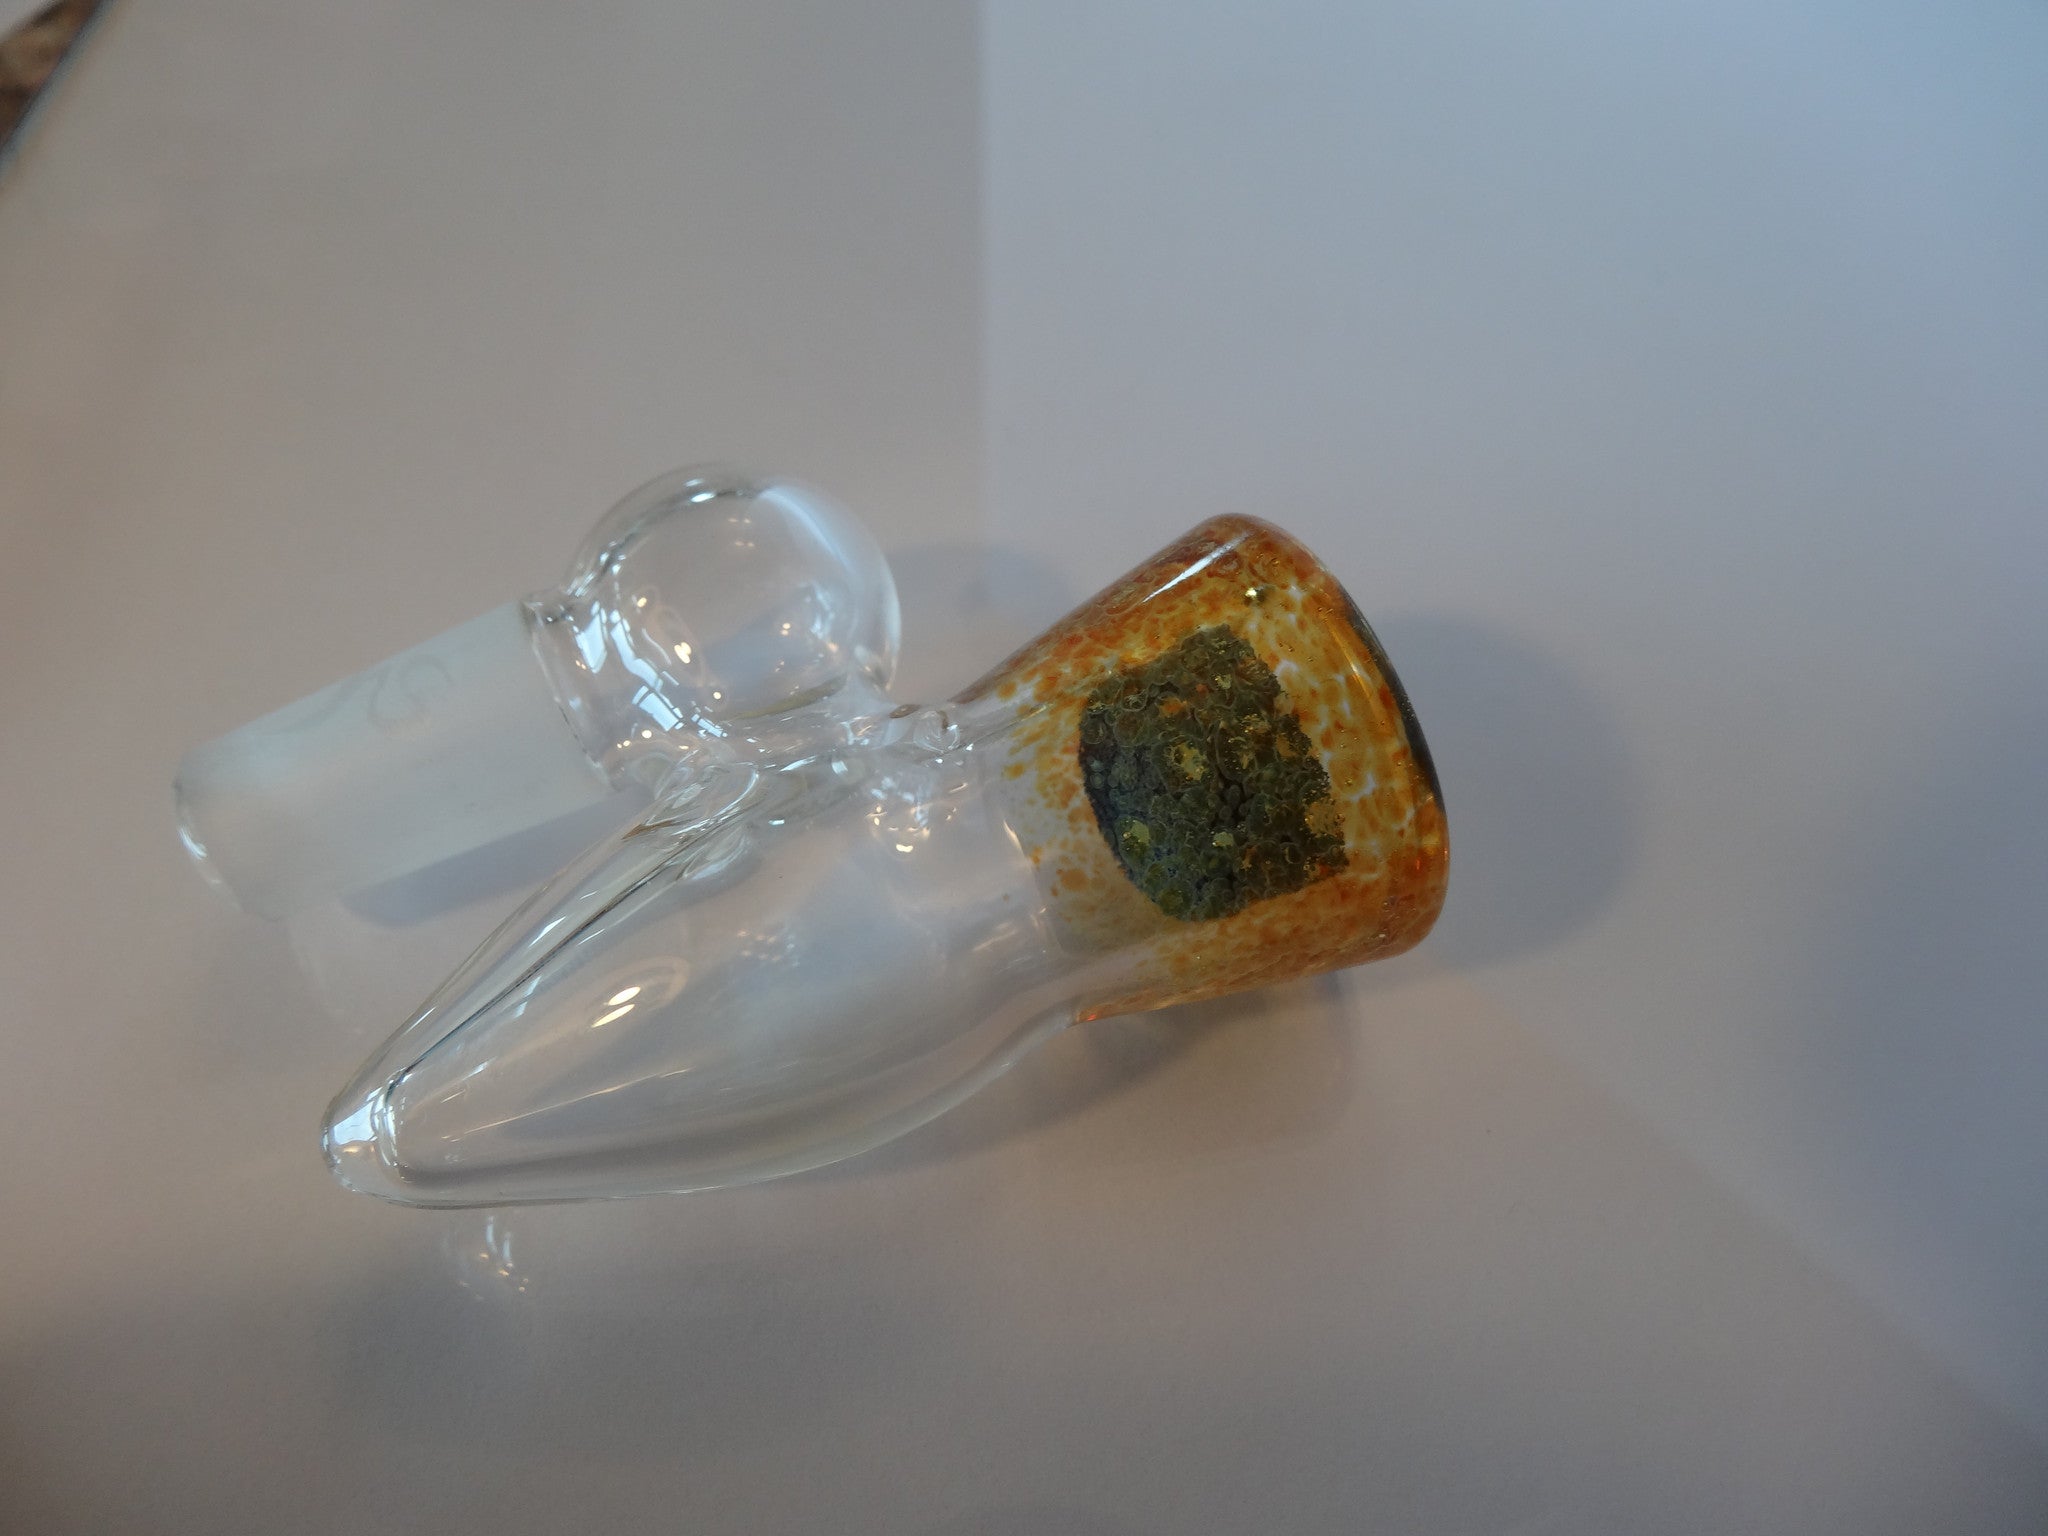 14mm Male Fritted Claim-Catcher Vaporslide